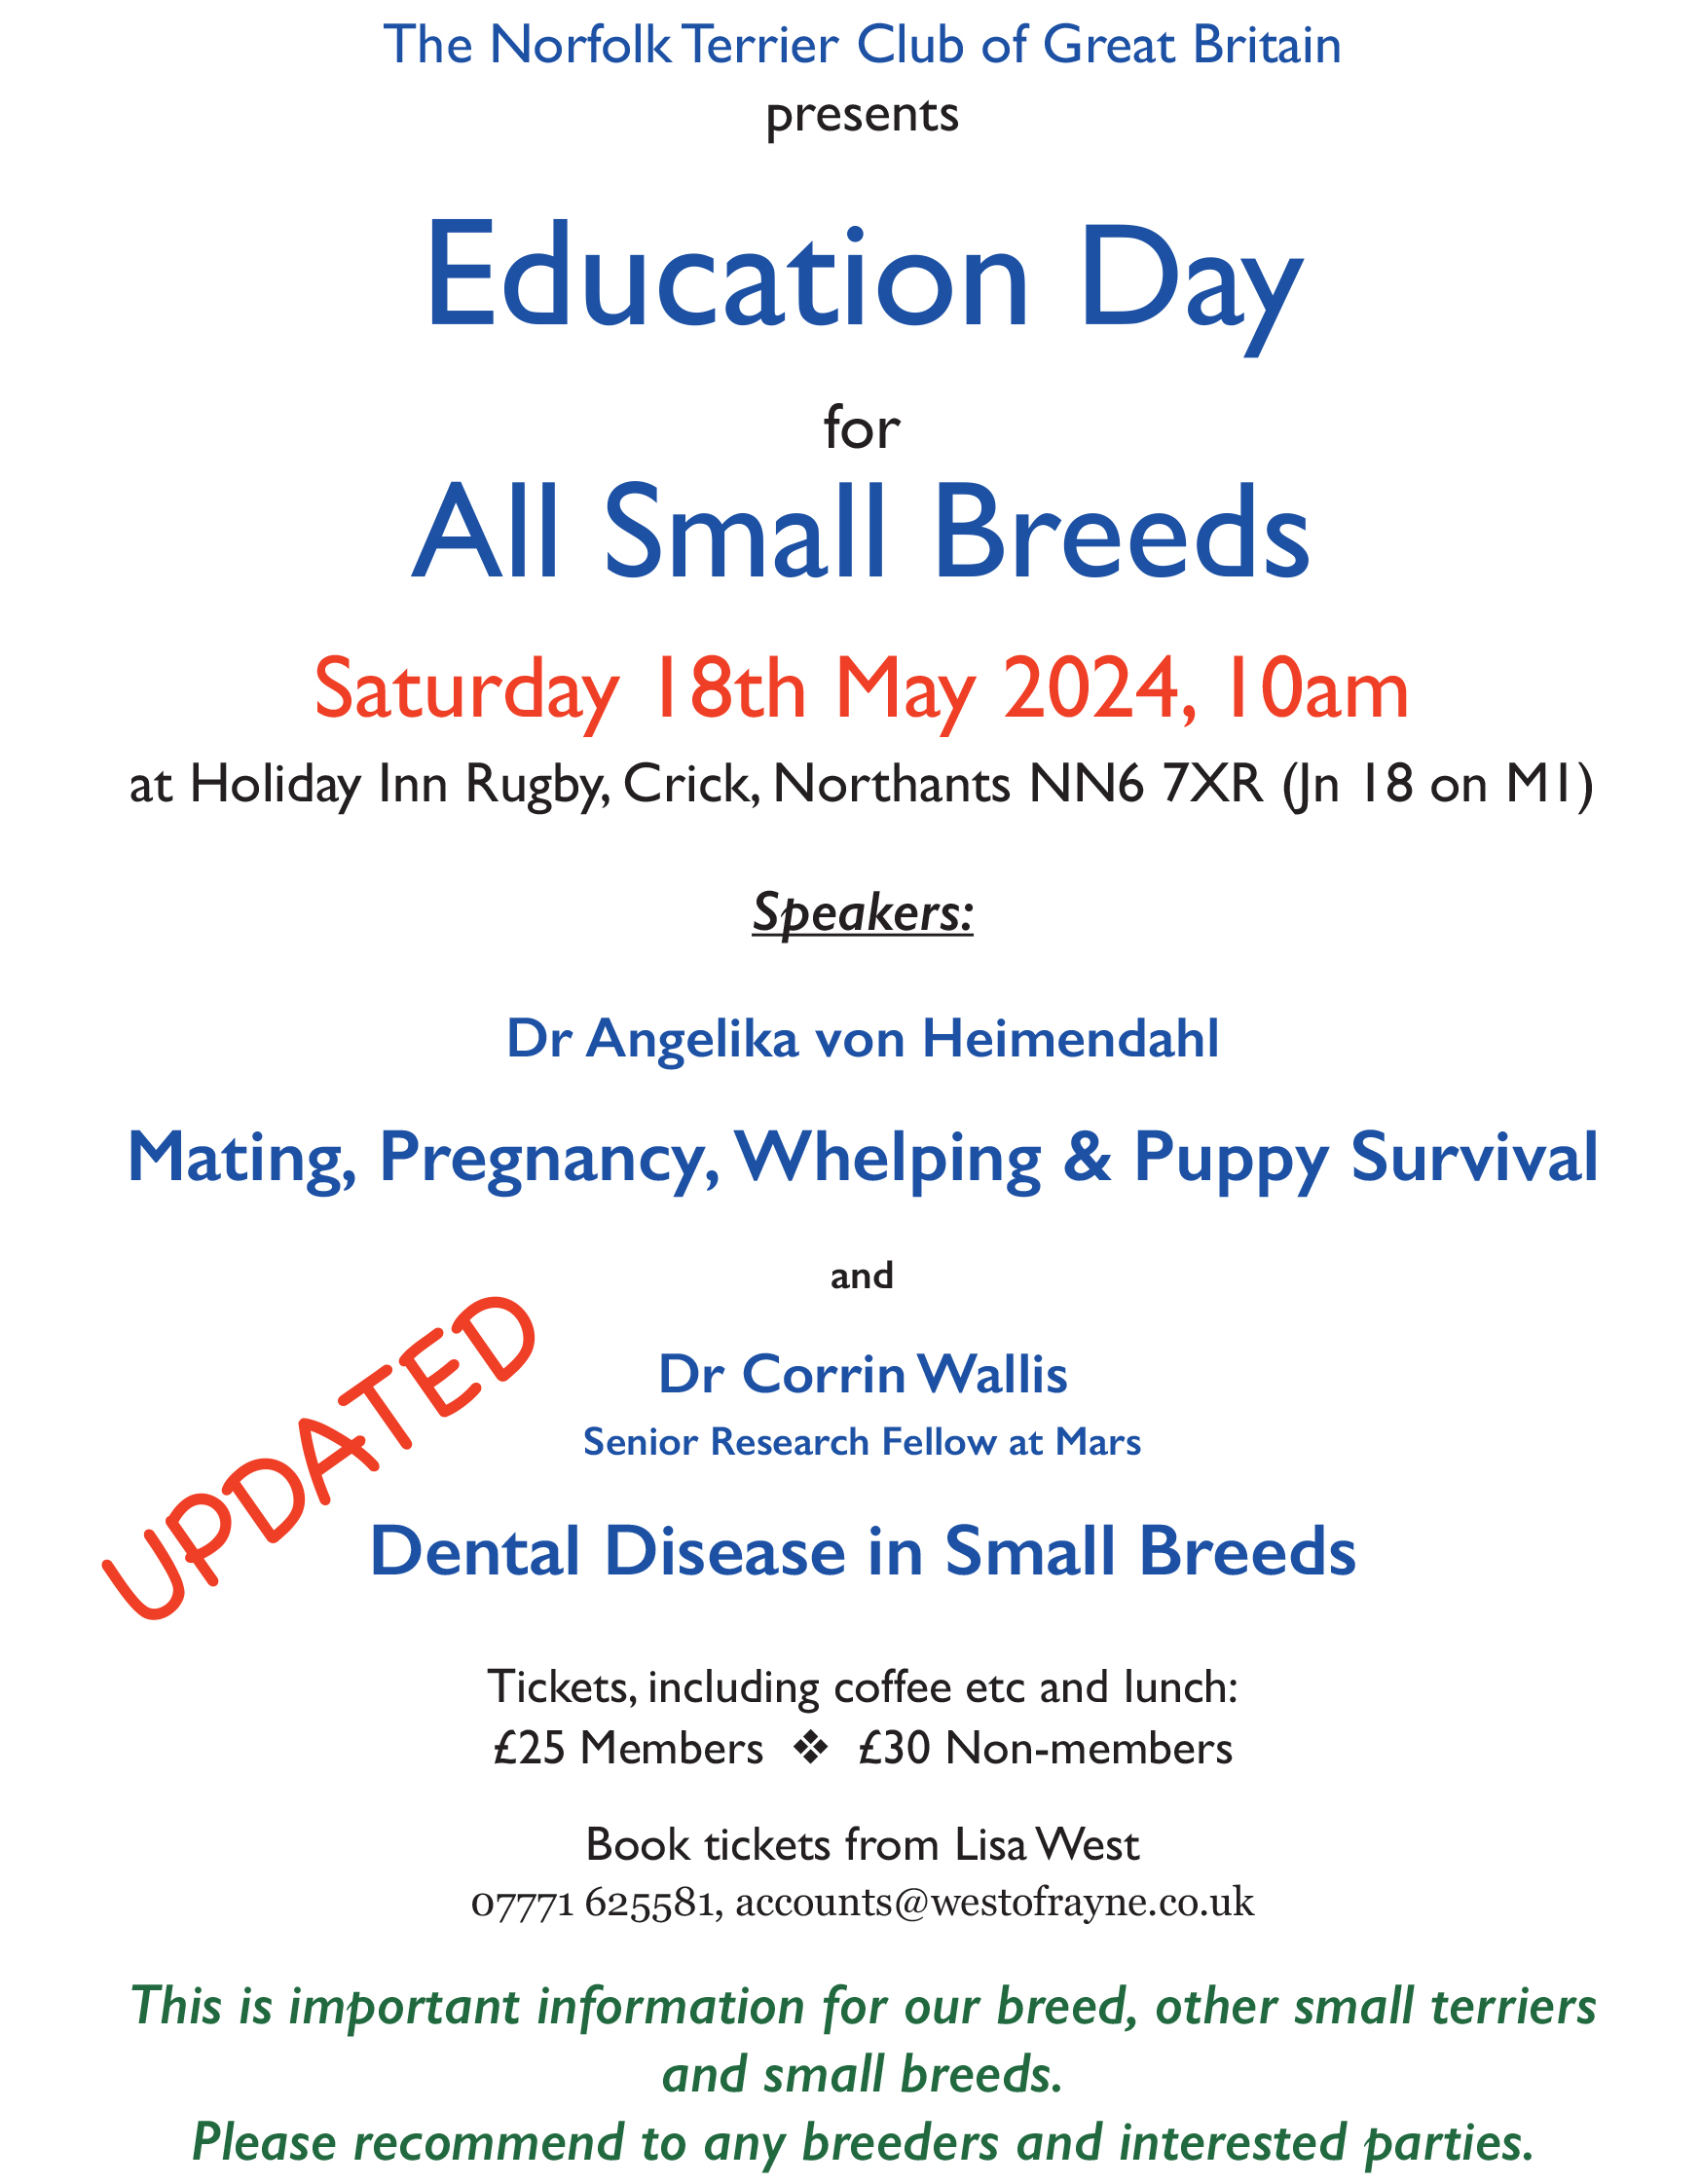 Details of the Education Day for small breeds, 18th May 2024 at Rugby Holiday Inn